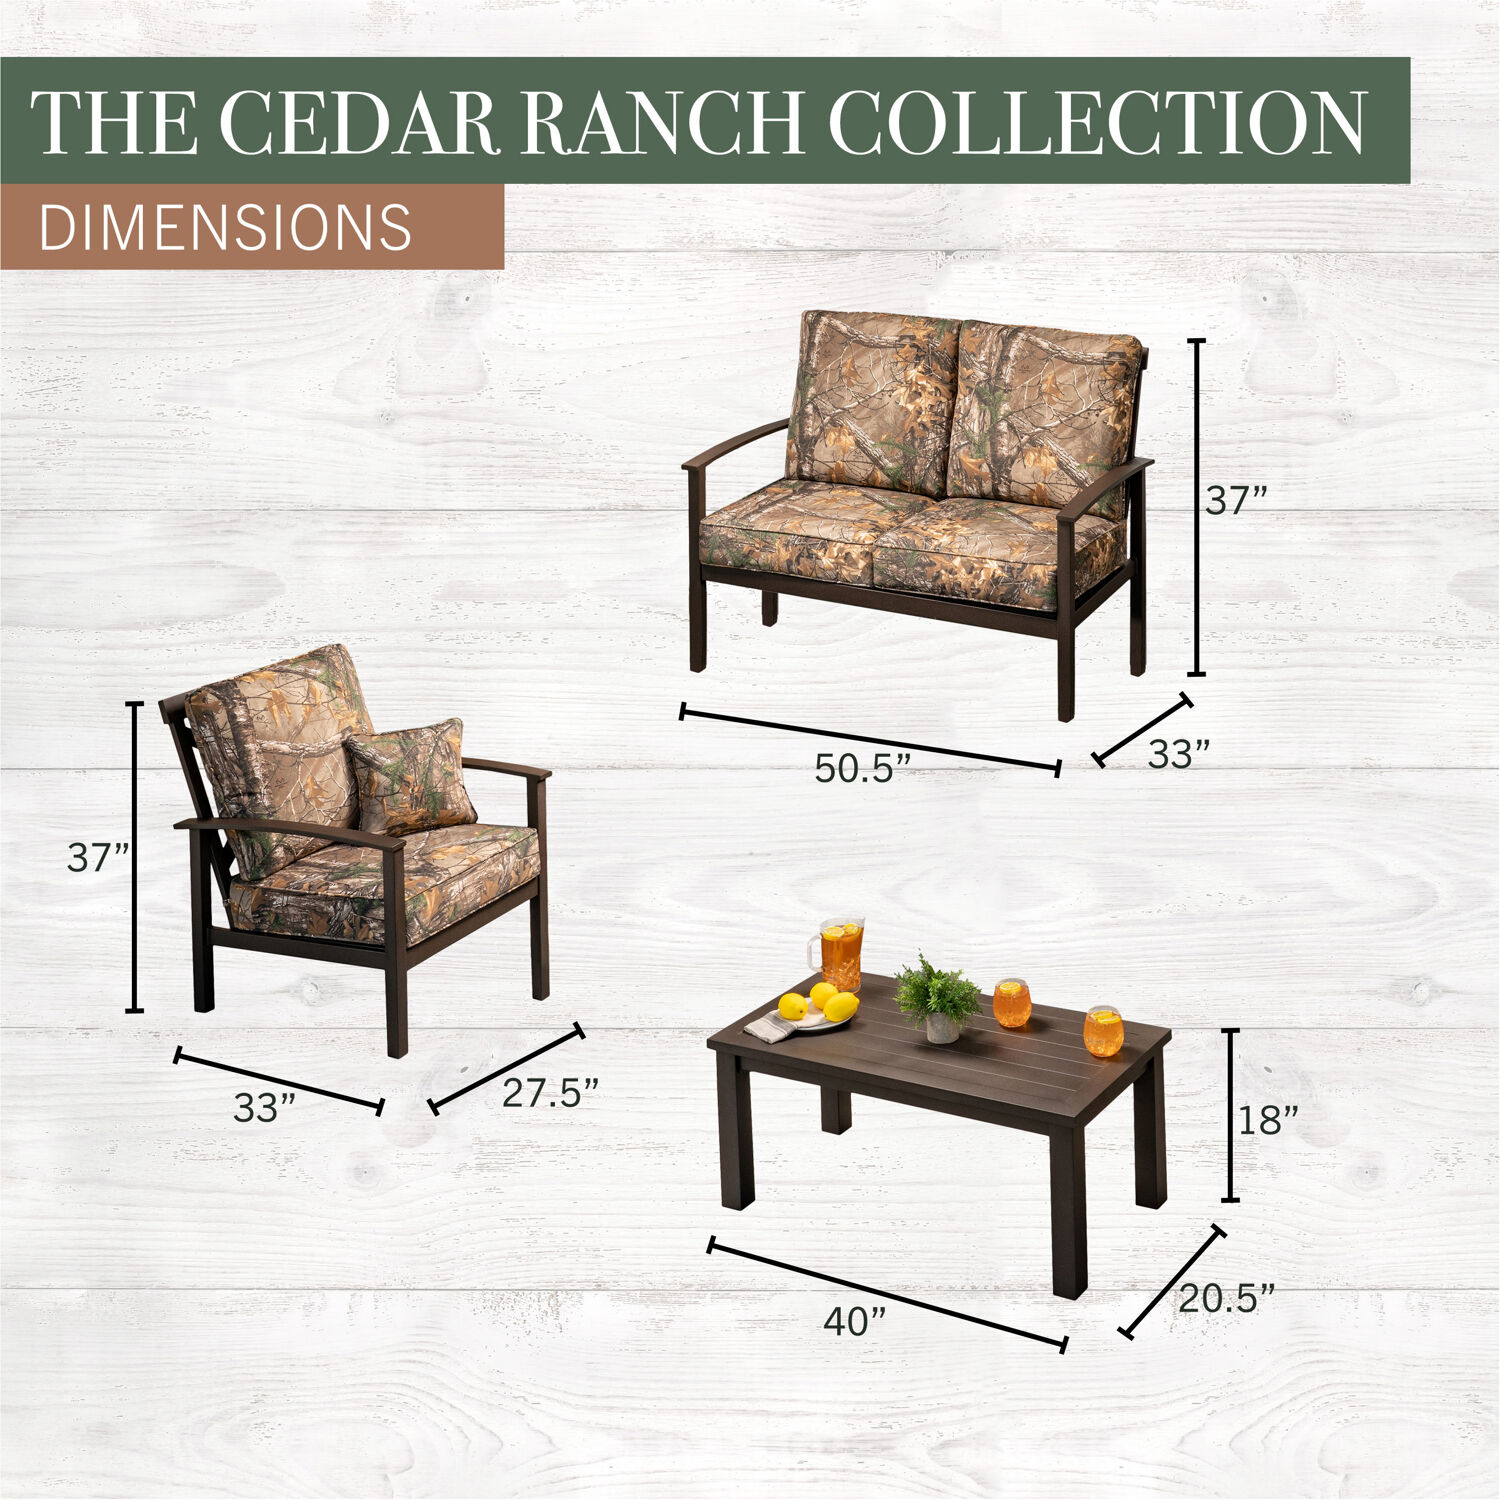 Hanover Cedar Ranch 4-Piece Outdoor Patio Furniture Set, 2 Deep Seating Chairs, Loveseat, and Coffee Table, Thick RealTree Printed Camo Cushions, CDRN - image 3 of 10